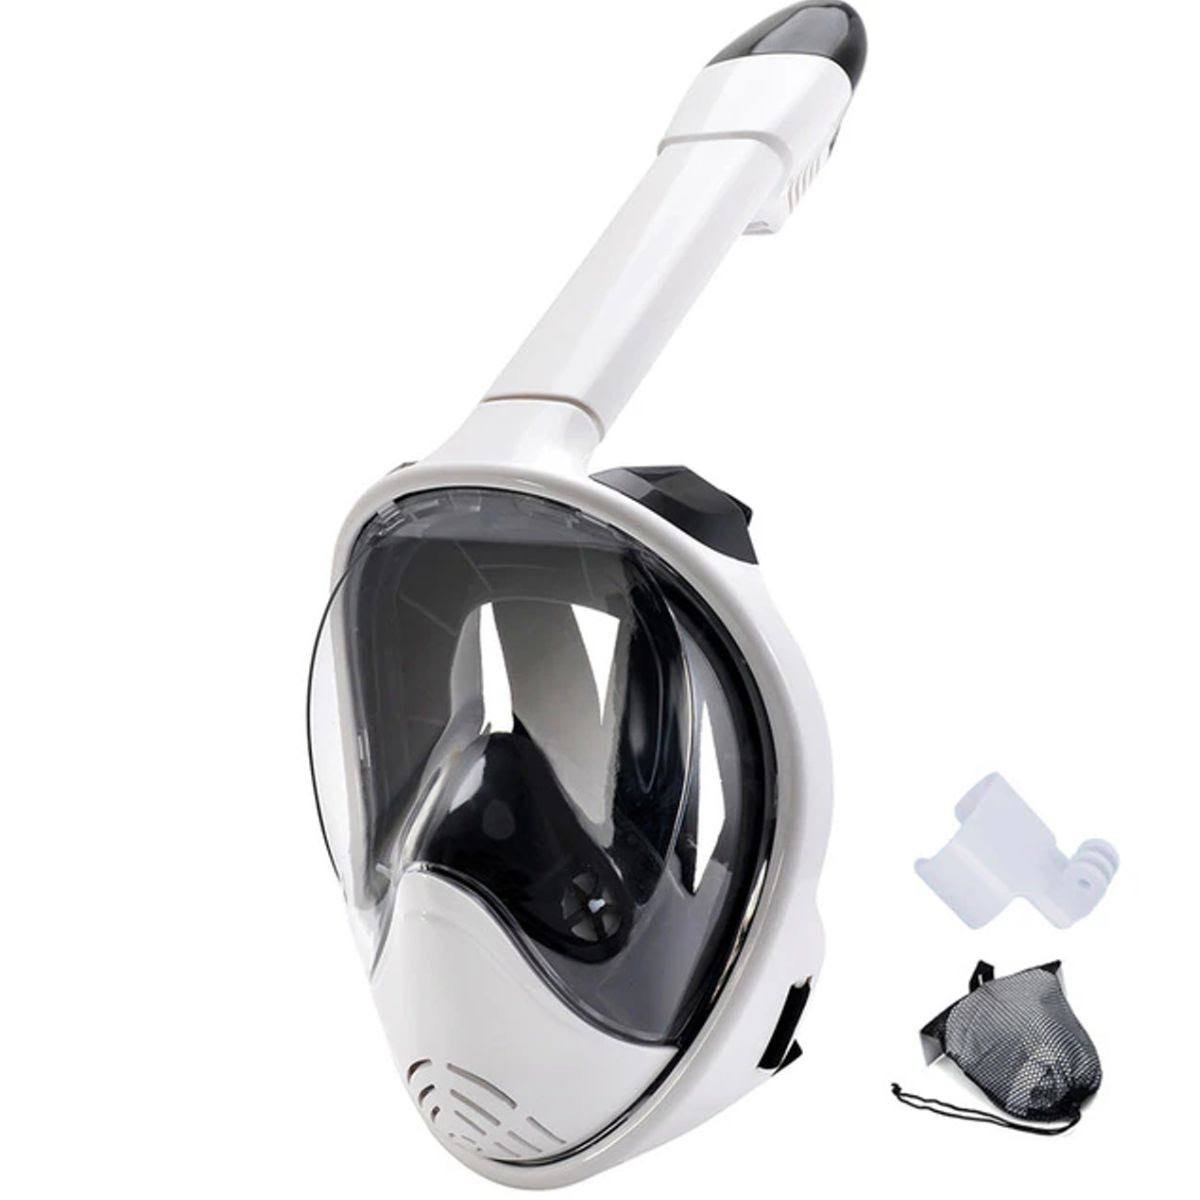 Snorkel Mask with Camera Mount - White Black (Prescription Available)